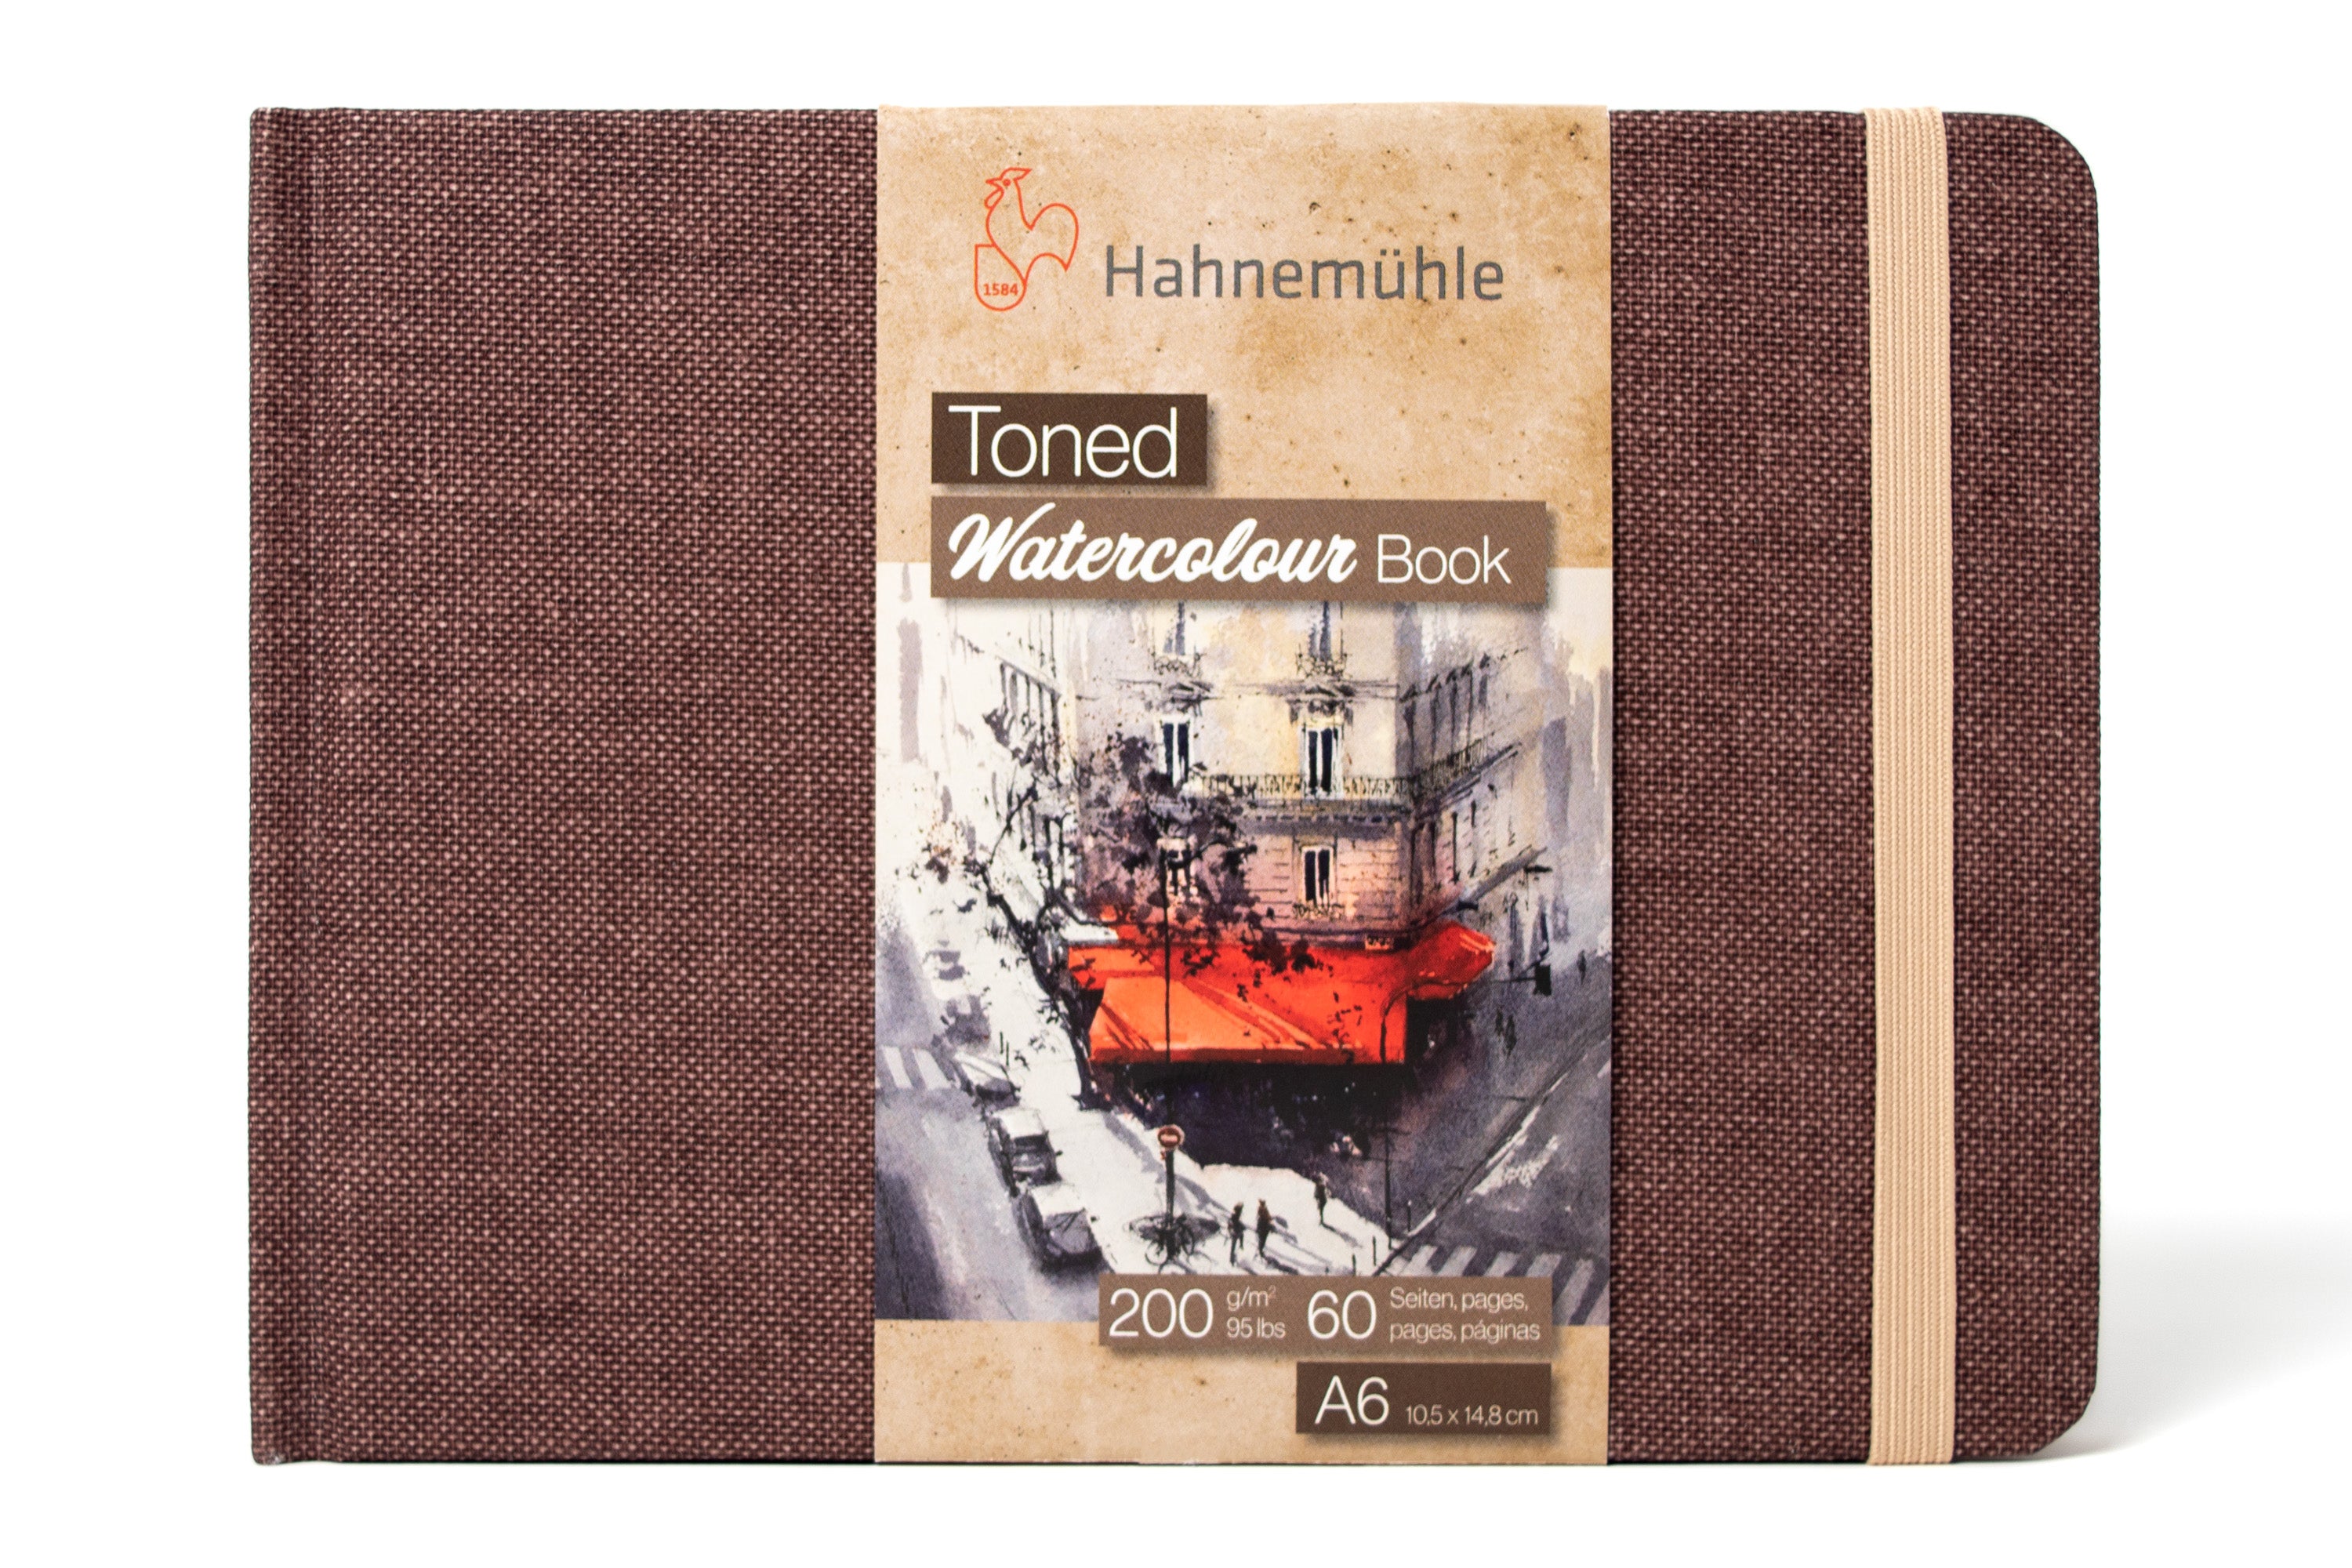 Hahnemühle Toned Watercolor Book - A6 4.1x5.8 Inch Tan Tinted Tinted  Watercolor Sketchbook for Painting Drawing Sketching and Mixed Media 